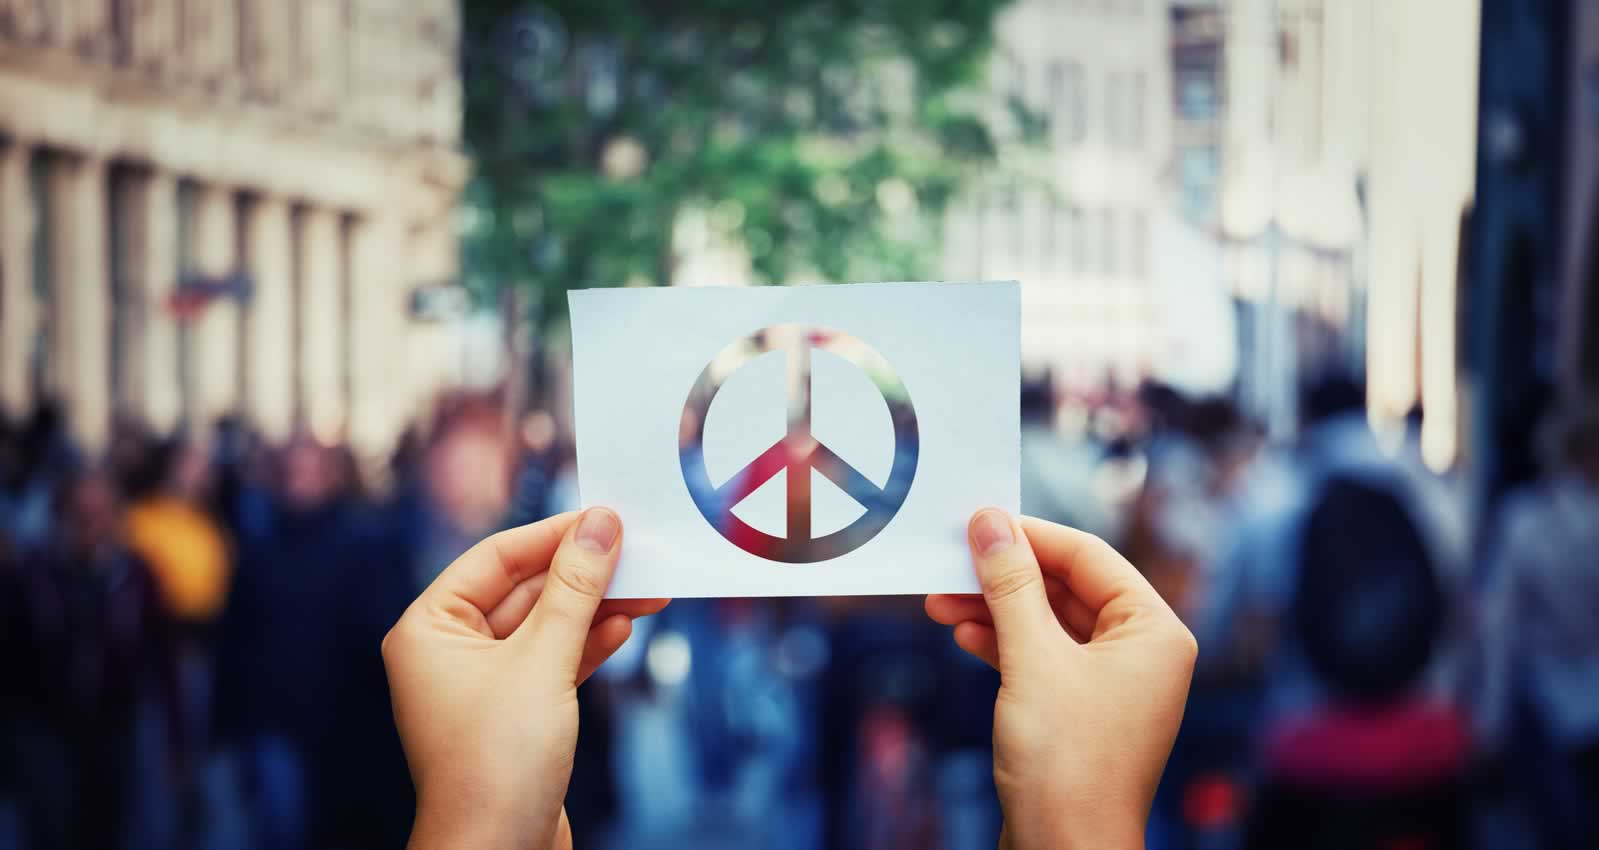 Conflict resolution student's hands holding up peace sign on paper